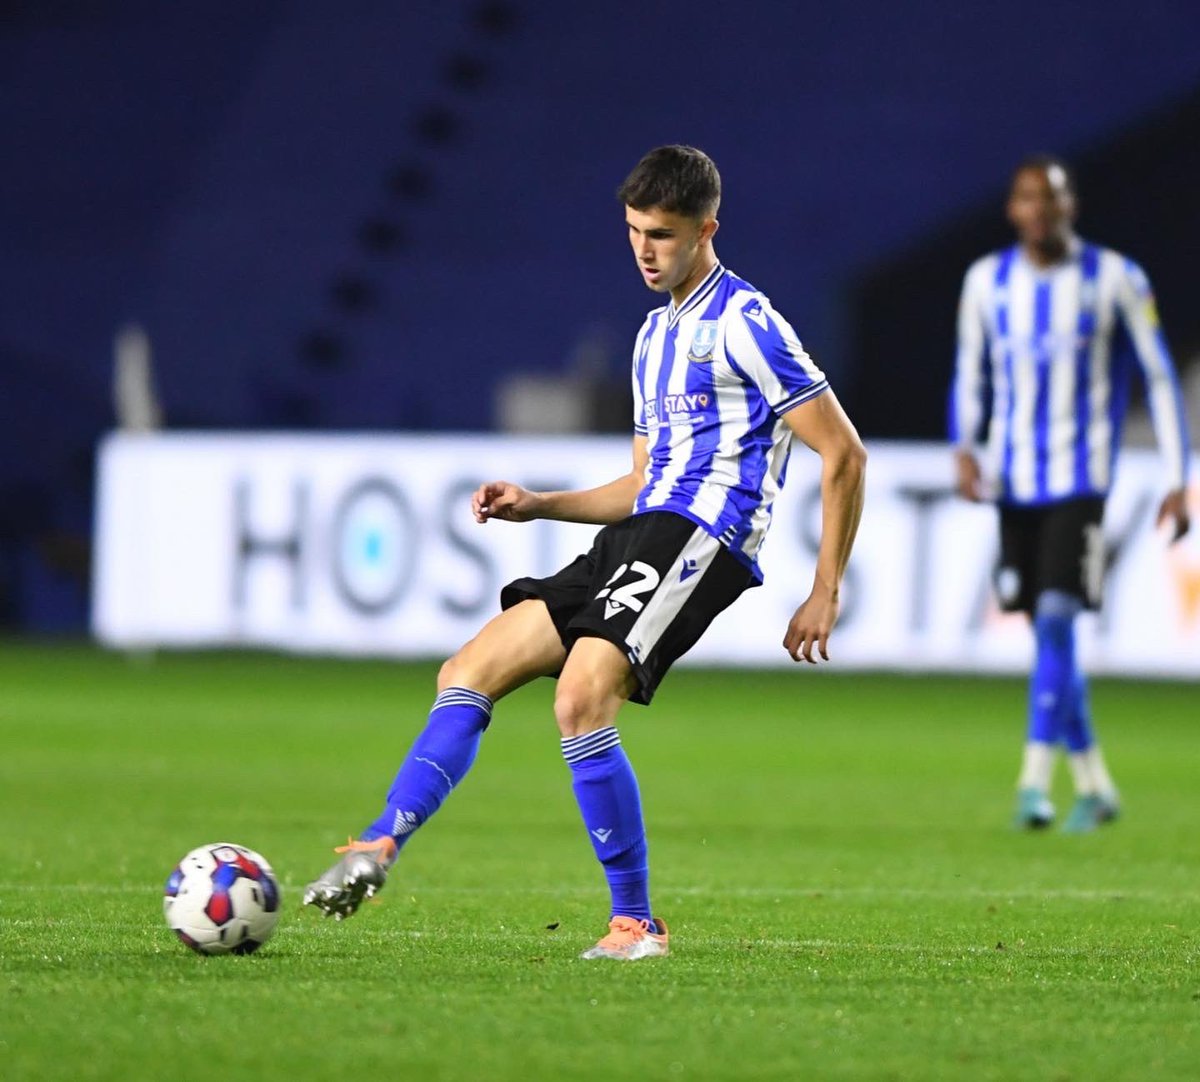 A dream come true to make my professional debut for @swfc 🦉 a special night for me and my family